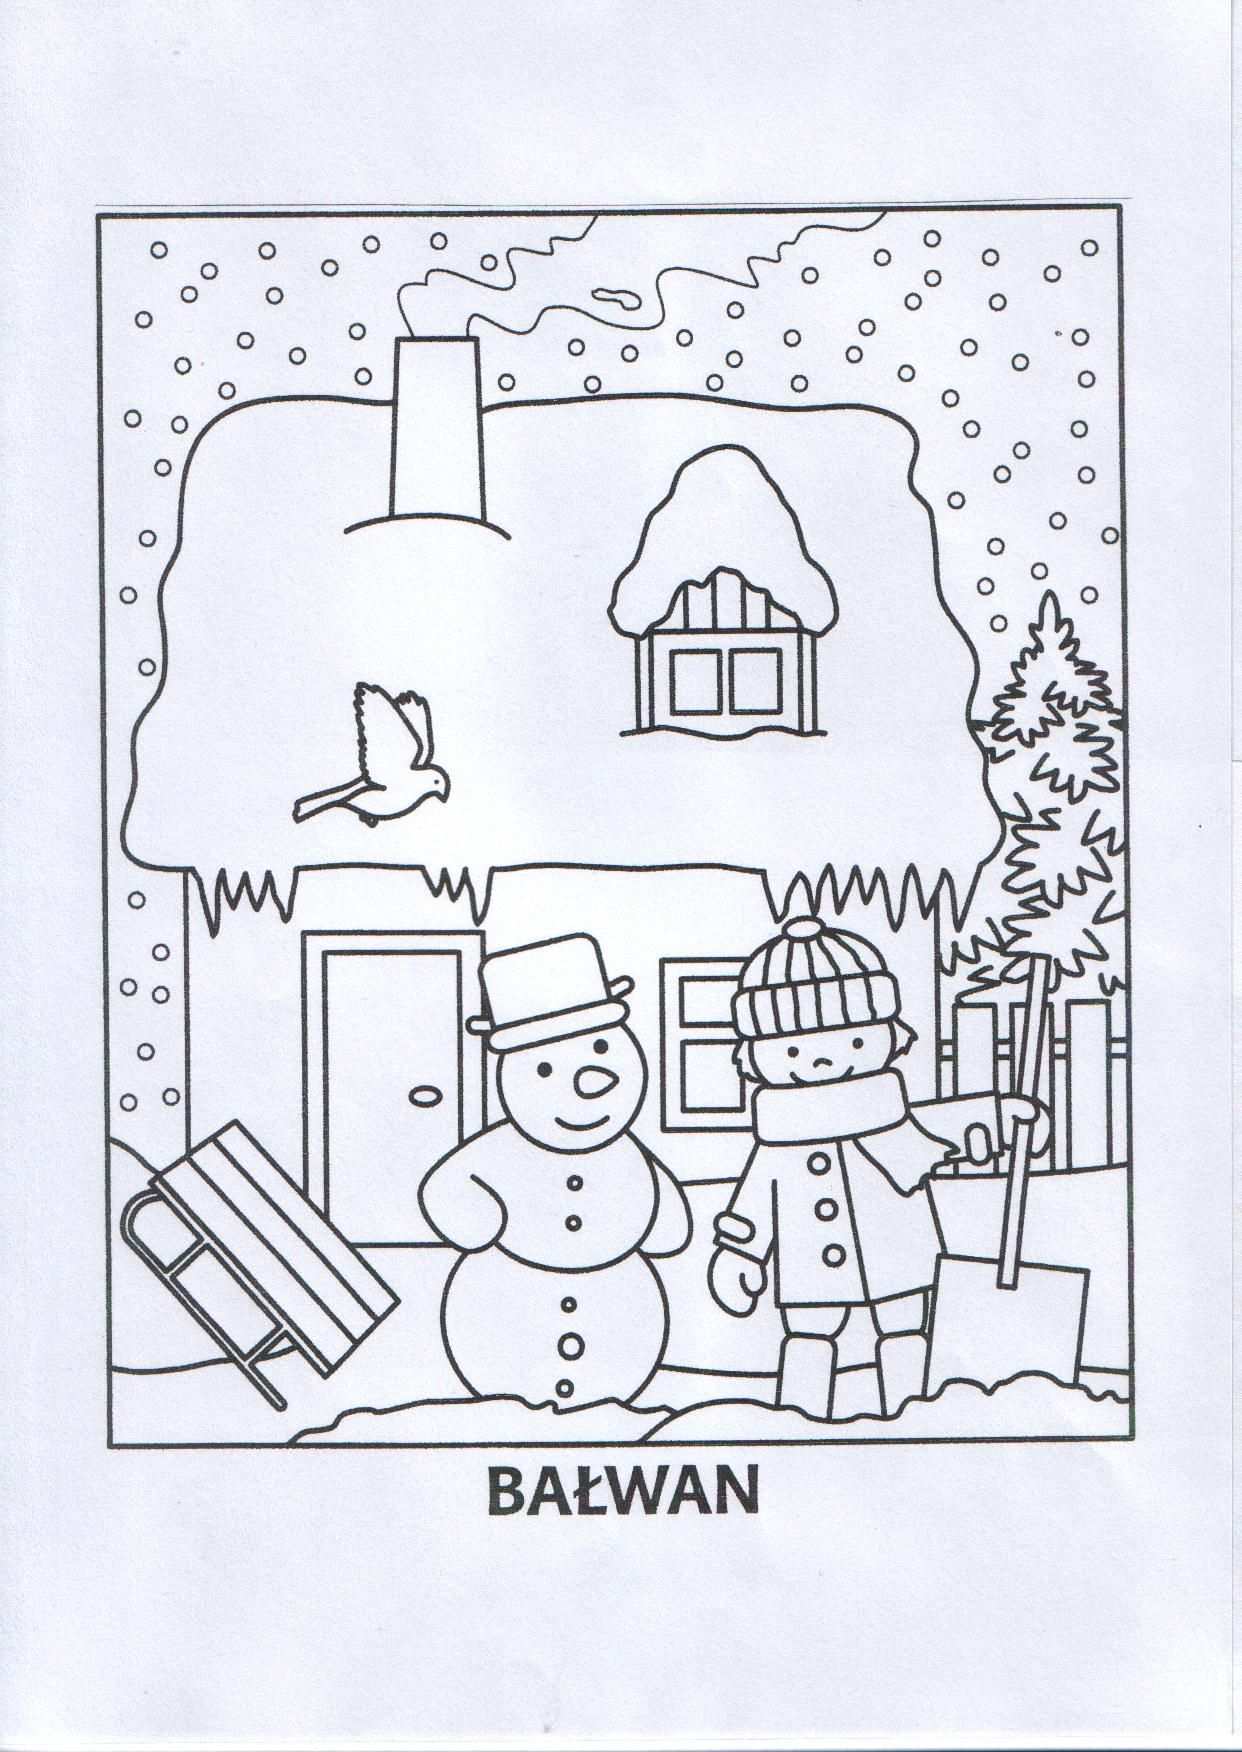 Zimowa Kolorowanka Jpg 1242 1752 Coloring Pages For Kids Coloring Pages Christmas Col